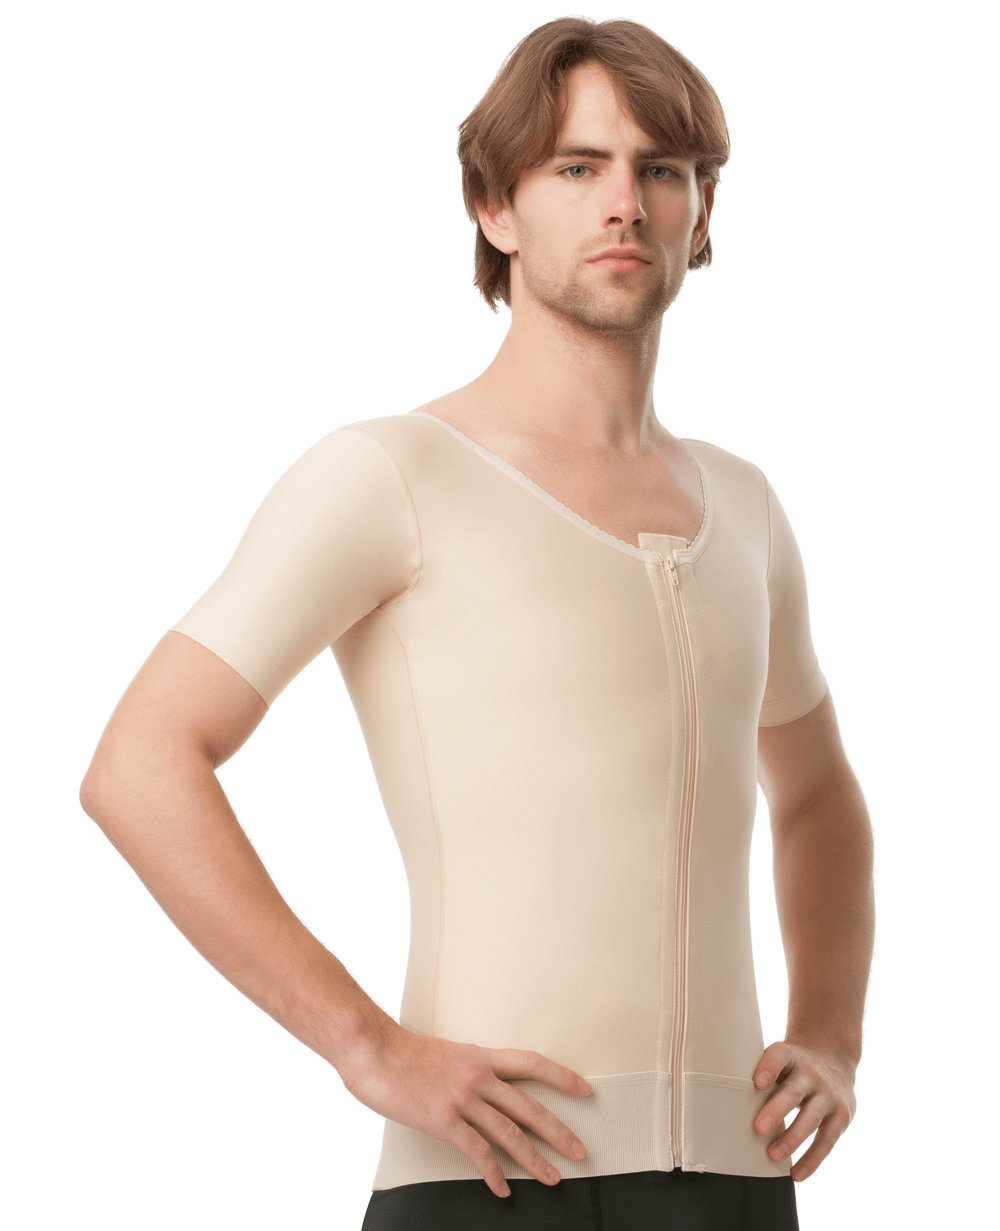 https://isavela.com/cdn/shop/products/Isavela_Compression_Garments_Fajas_PlasticSurgery_RecoveryGarment_bodycontour_postsurgical_support_male_short_sleeve_abdominal_cosmetic_surgery_compression_vest_with_zipper_mg06_01.png?v=1683247985&width=1000